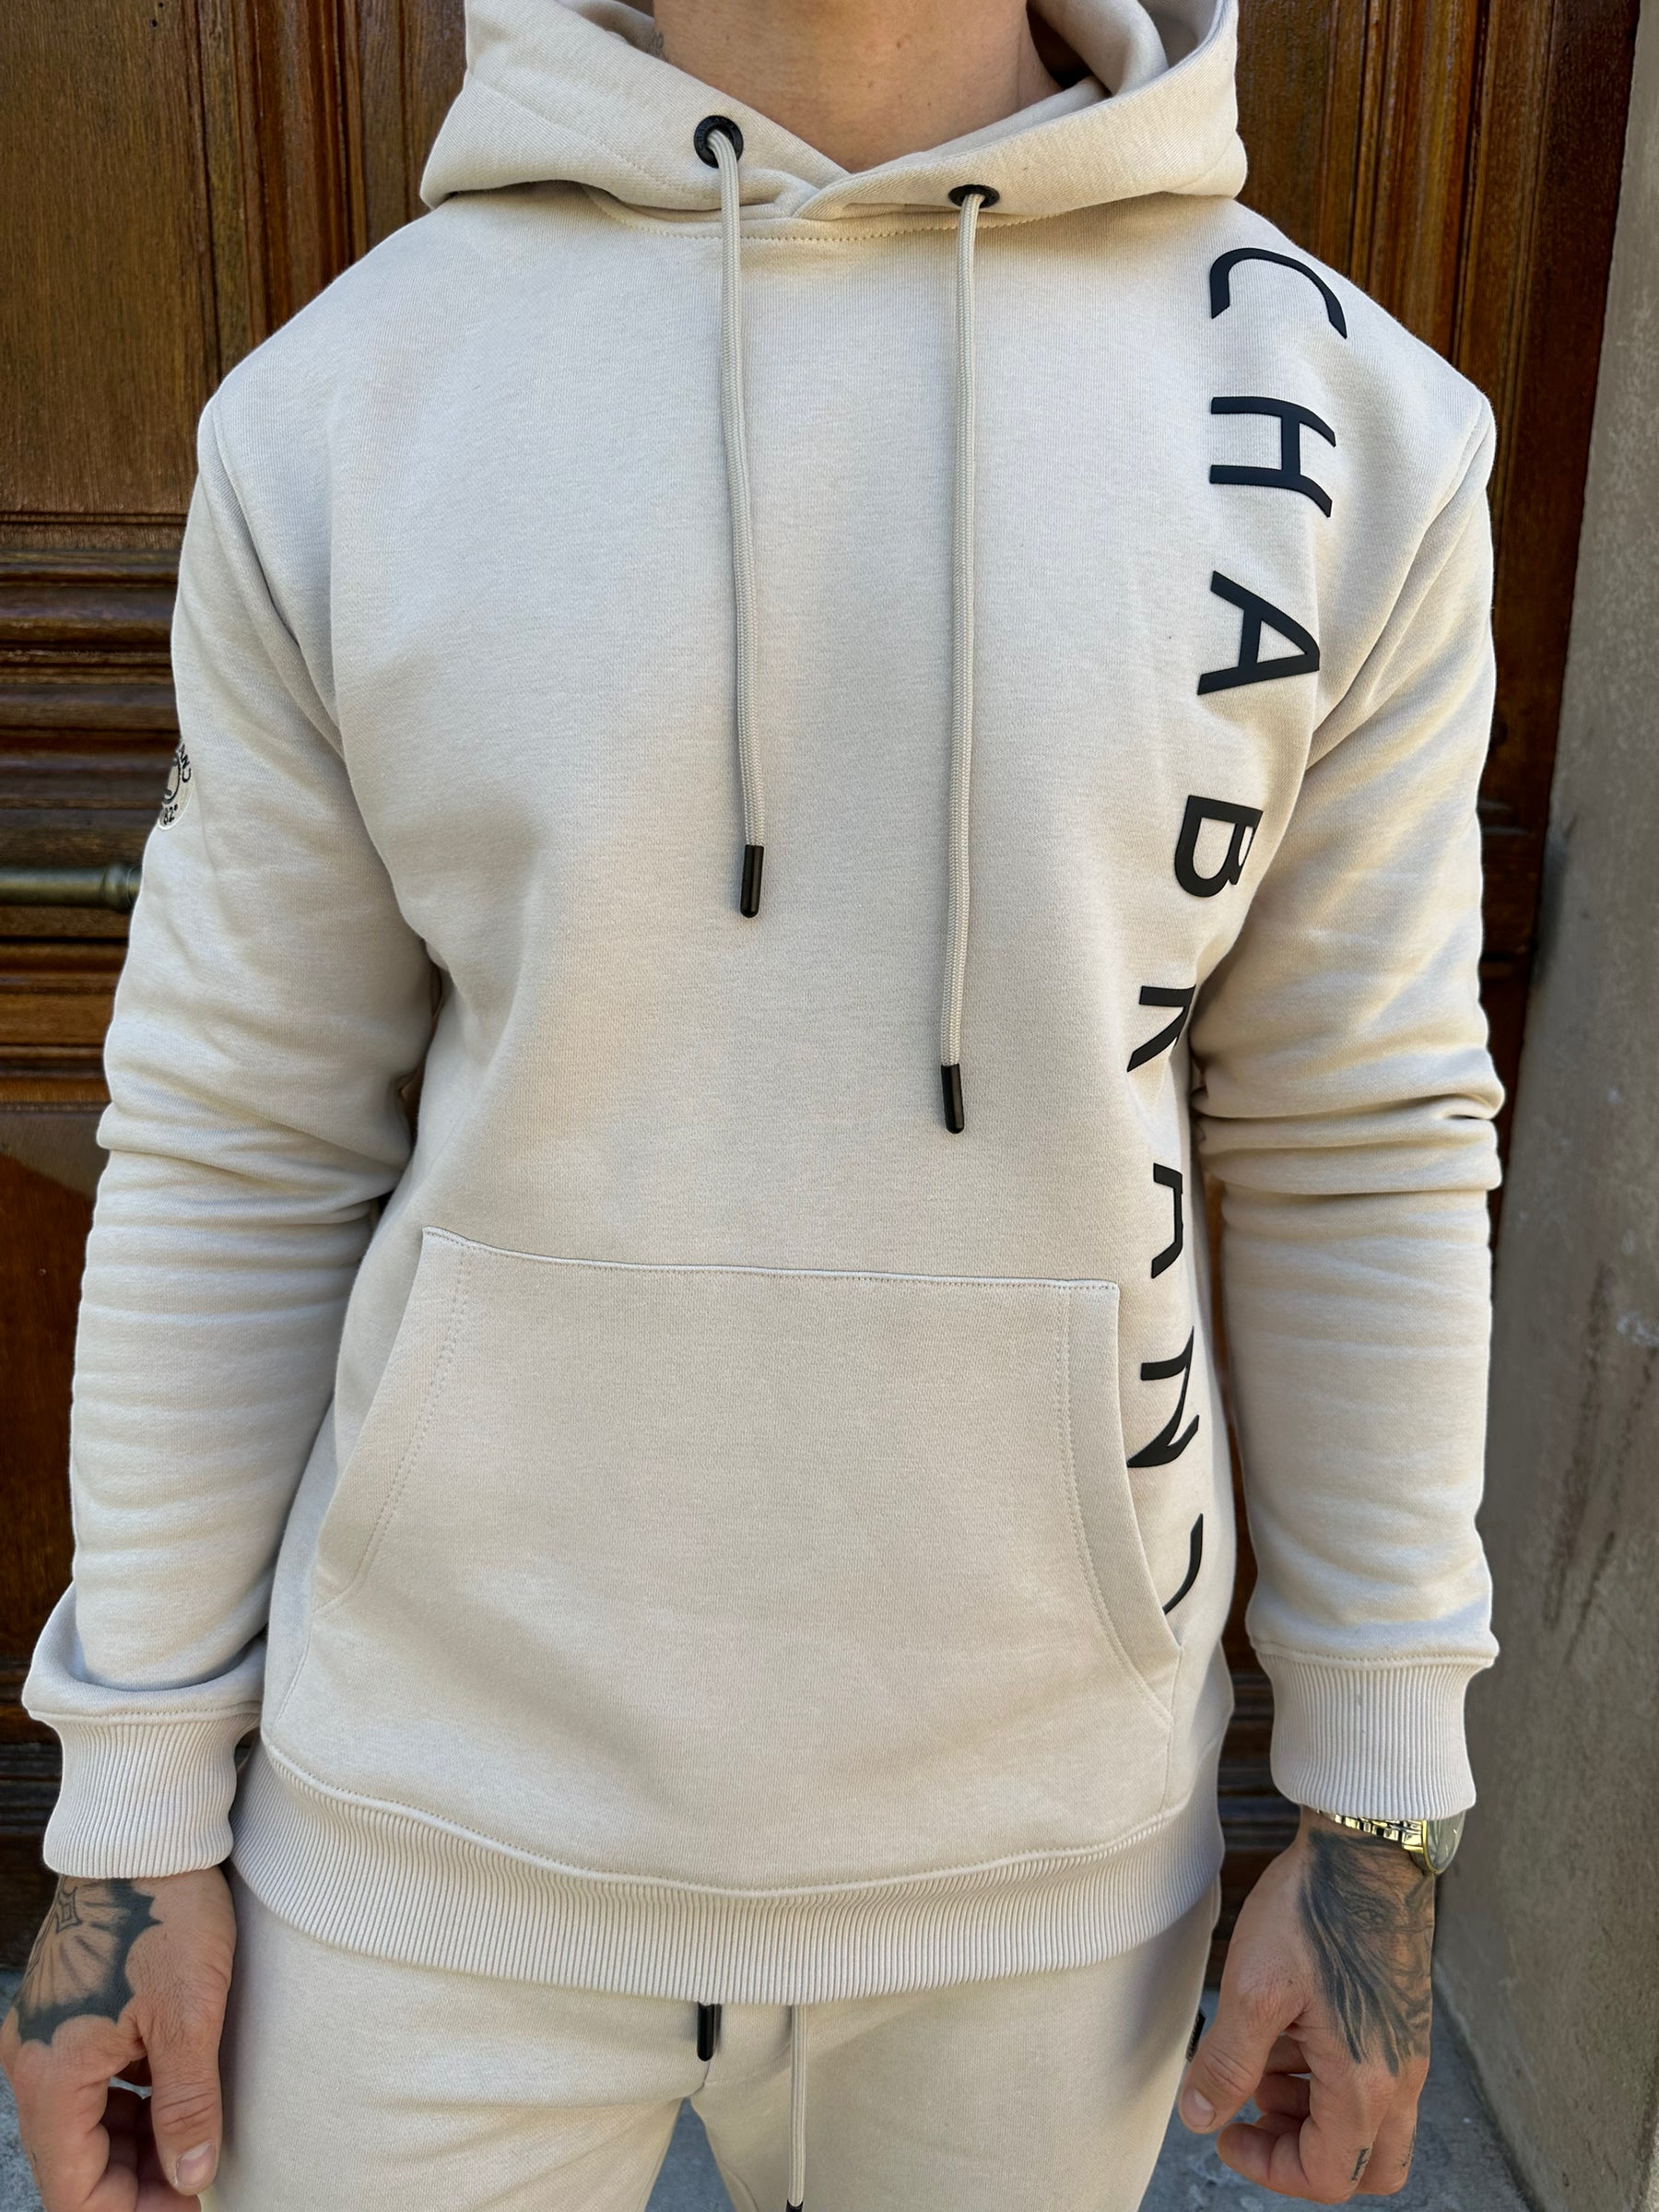 CHABRAND - Greige hooded sweatshirt with black sign